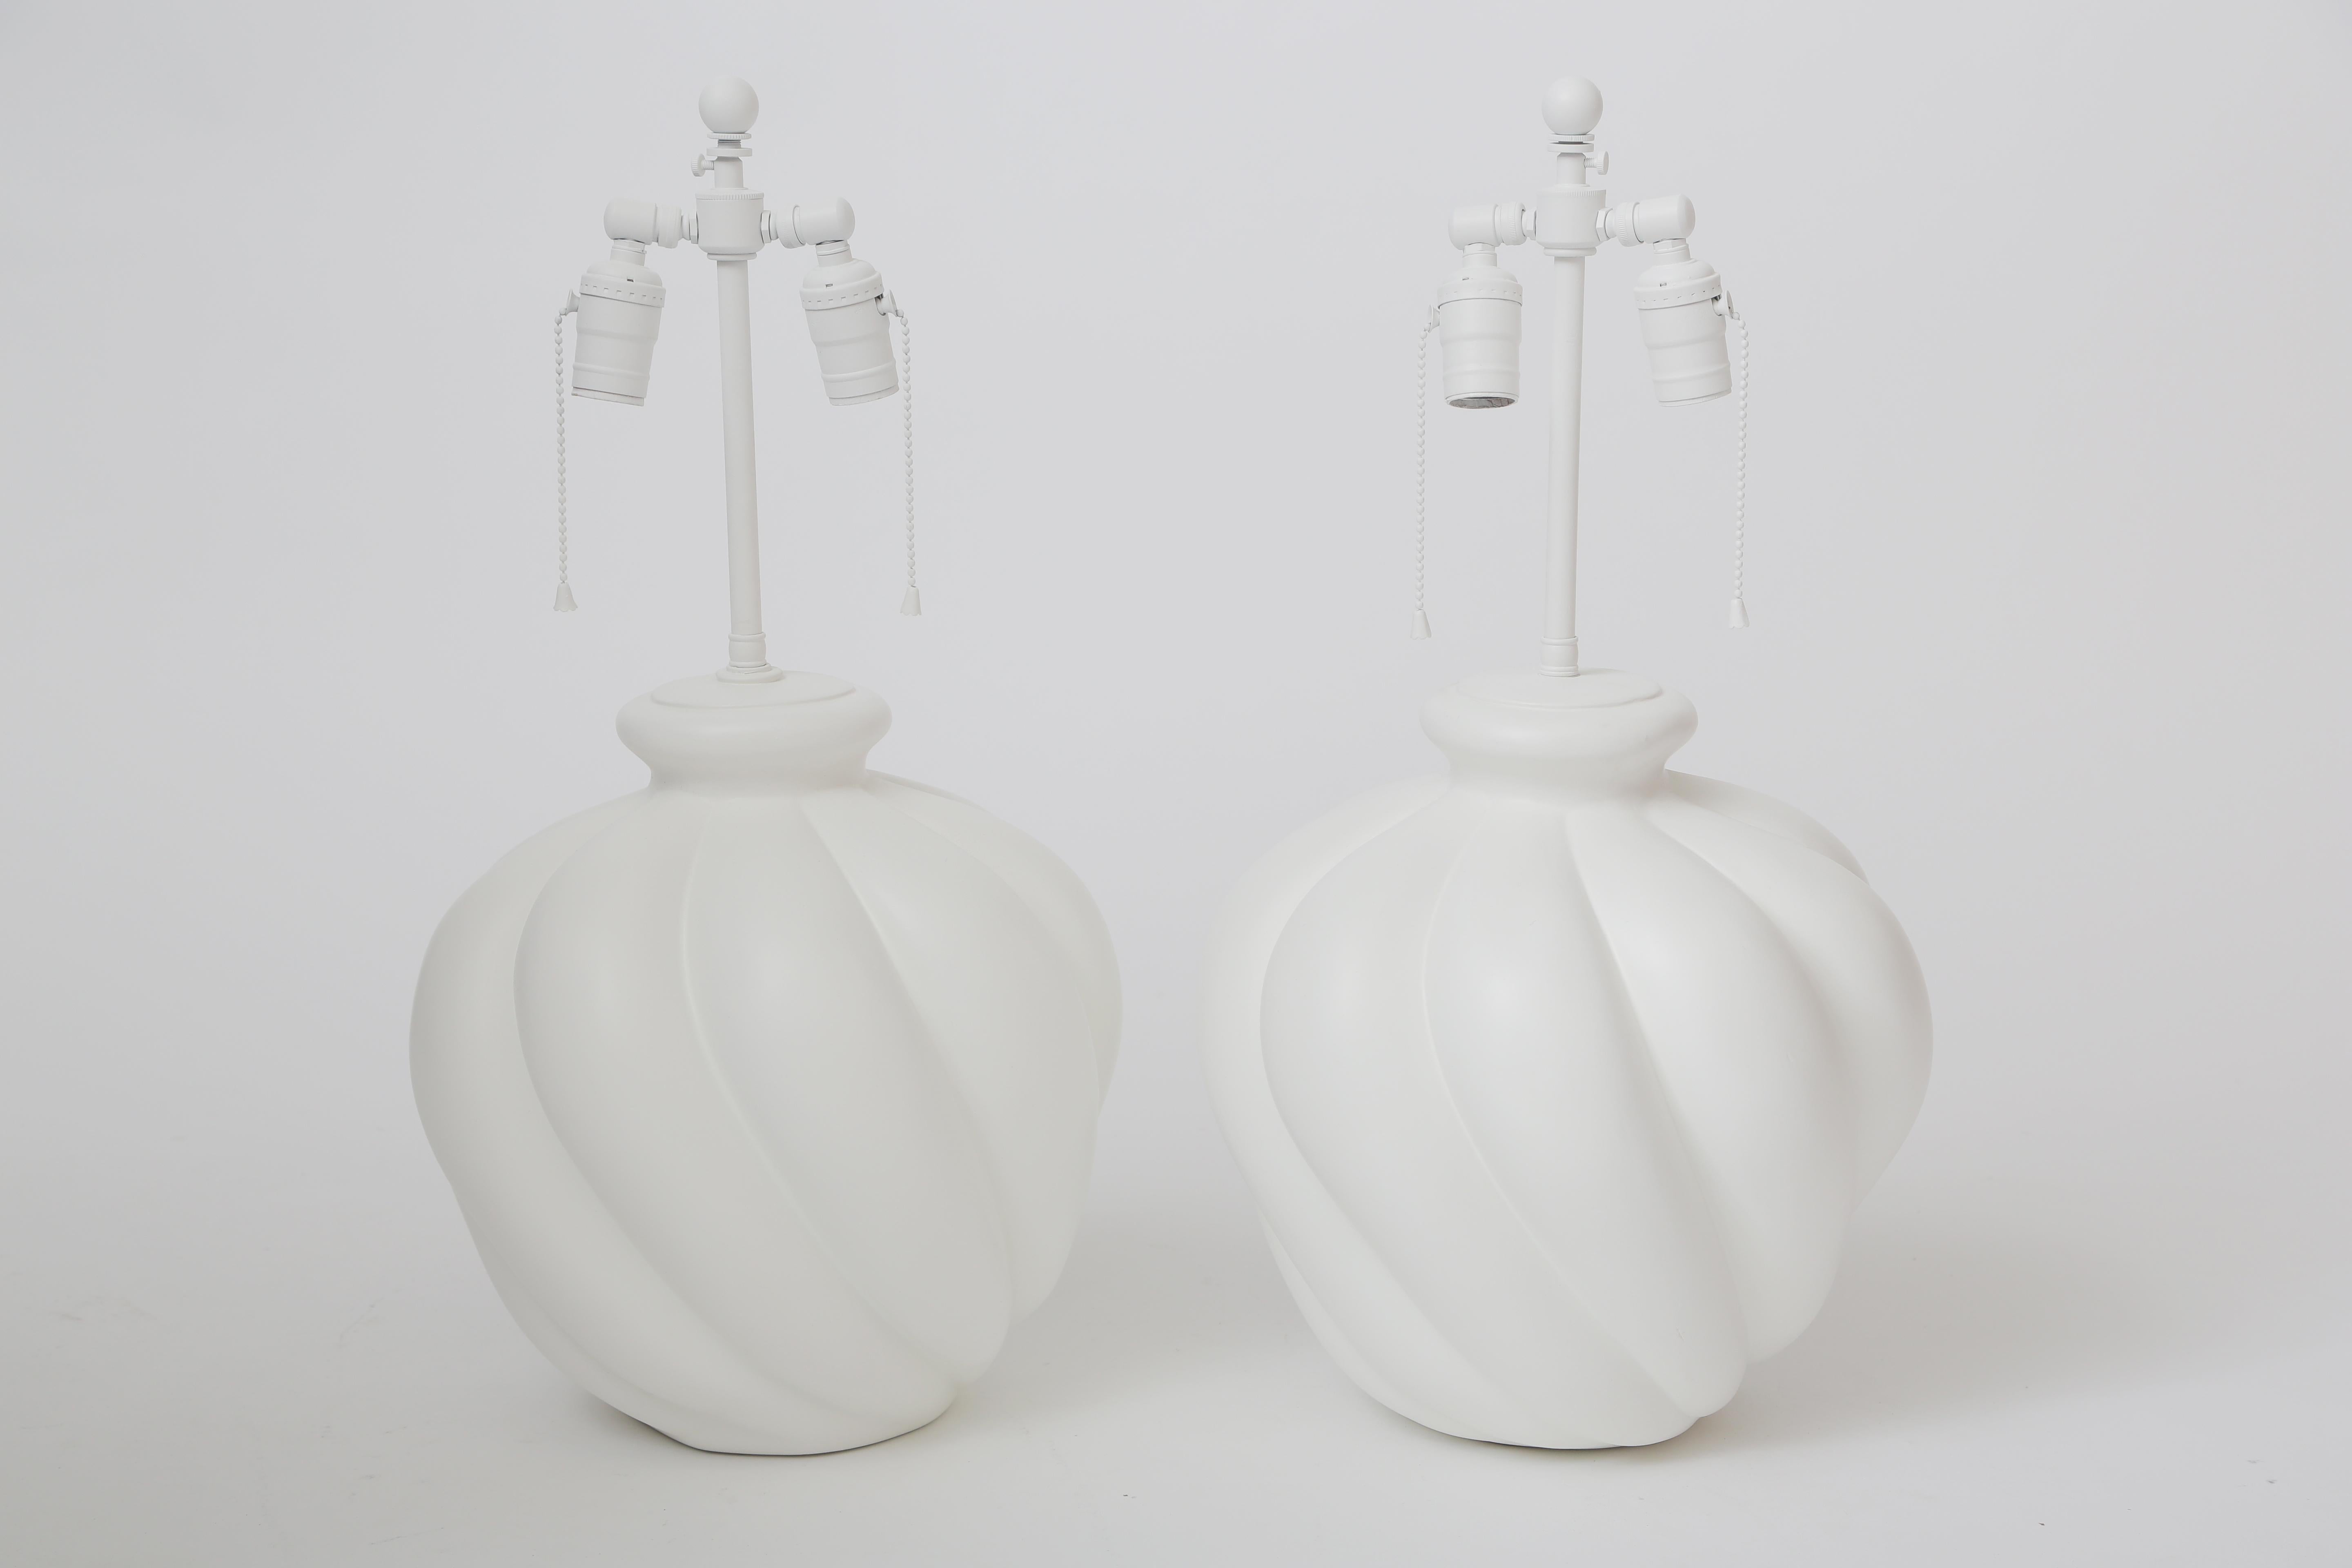 A pair of Sirmos gourd/melon lamps.
An organic form in white plaster.